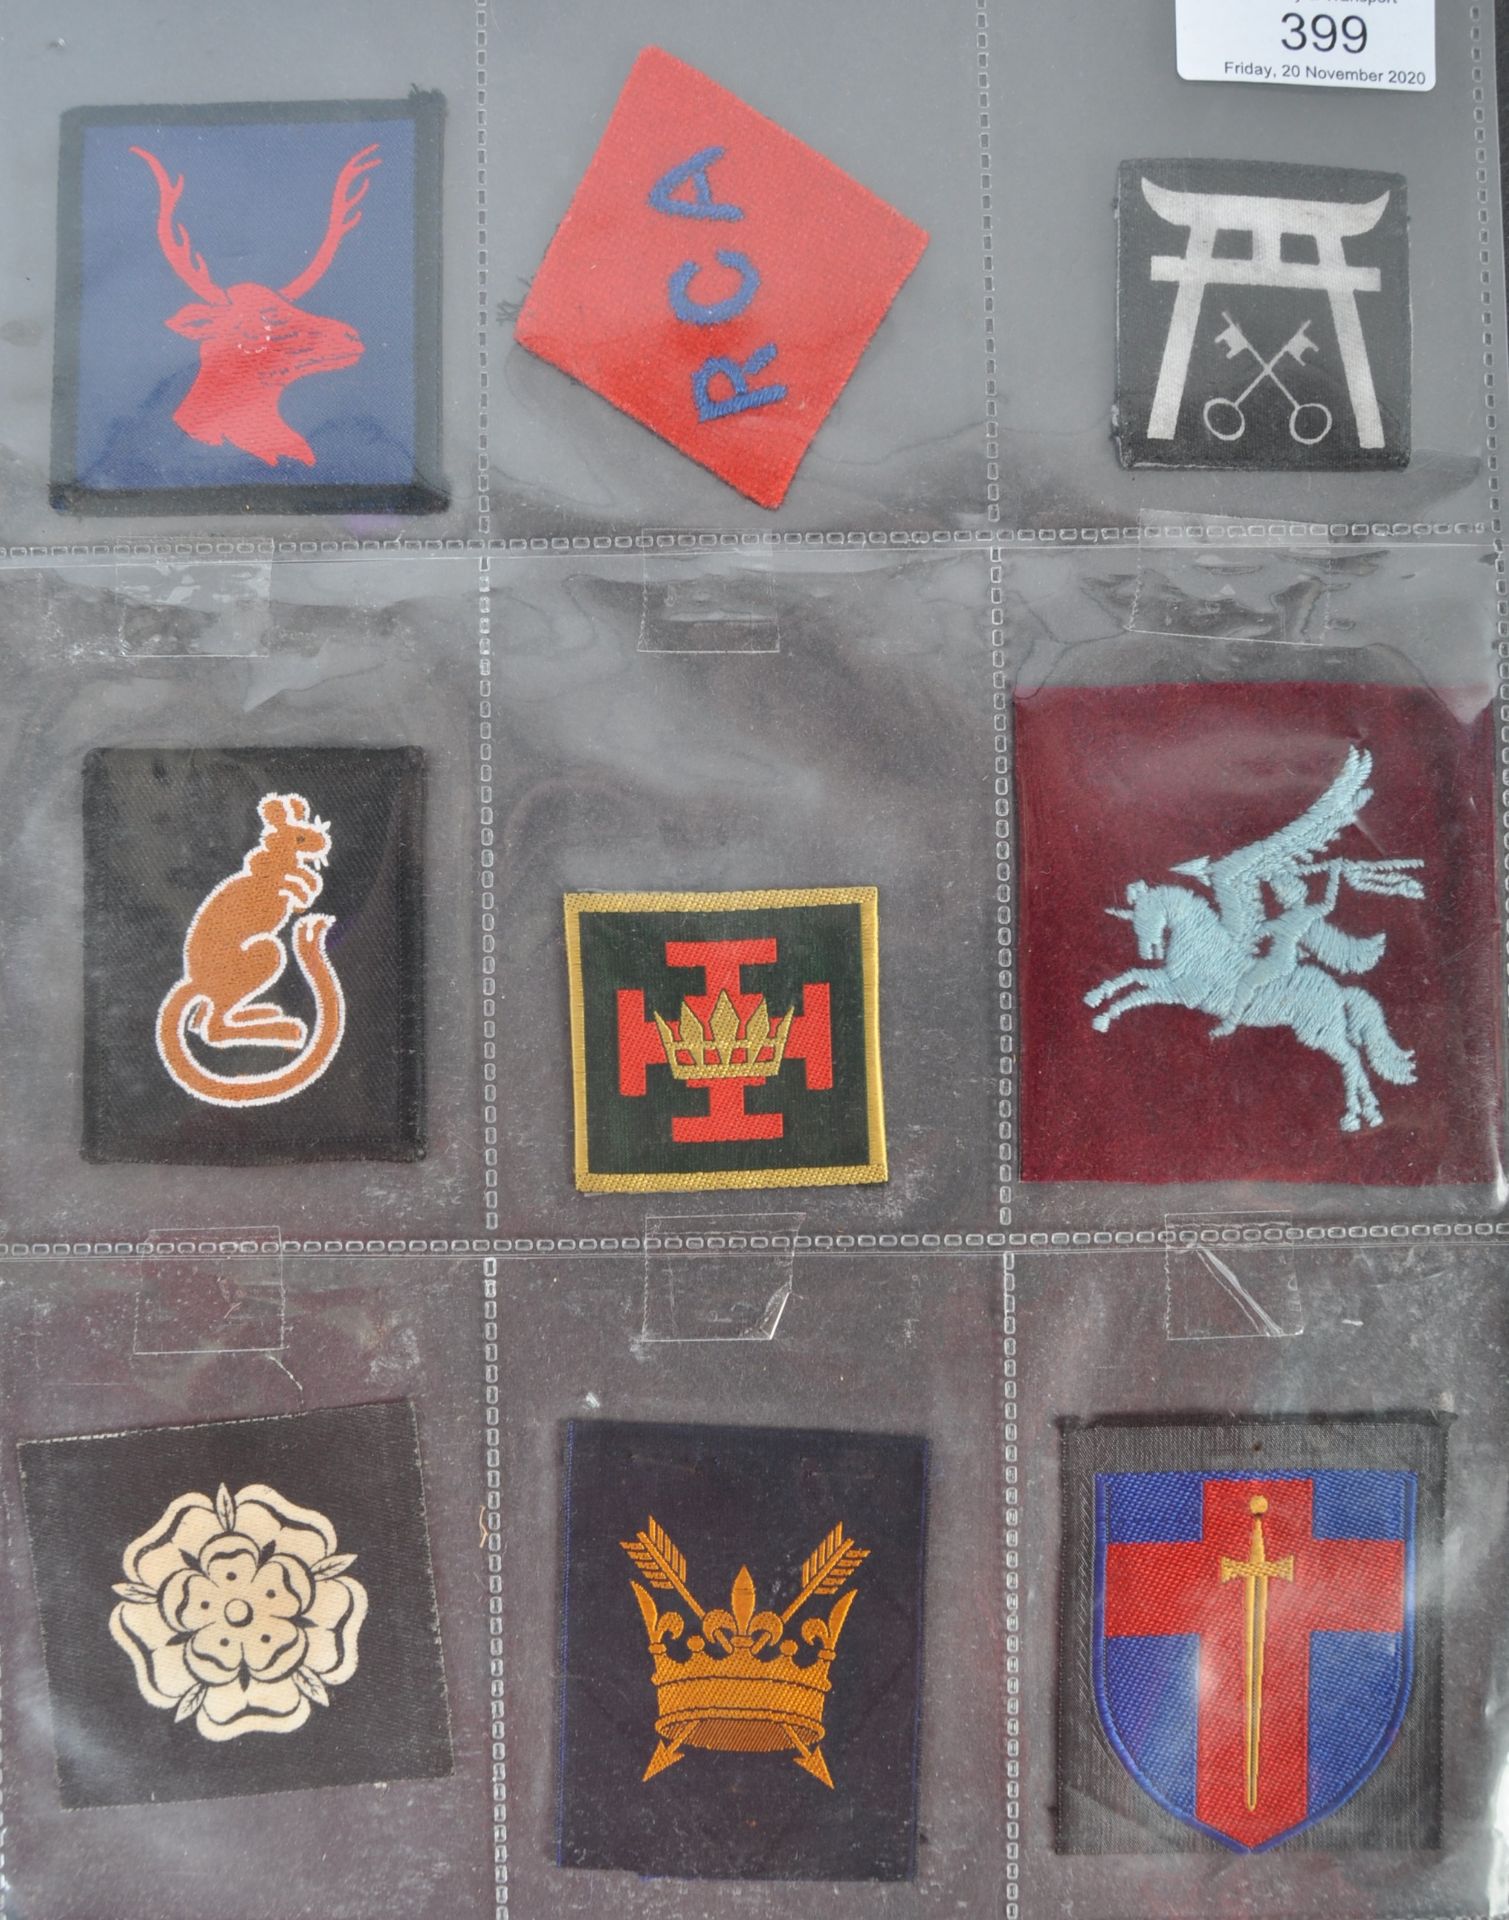 LARGE COLLECTION OF BRITISH CLOTH FORMATION PATCHES - Image 4 of 5